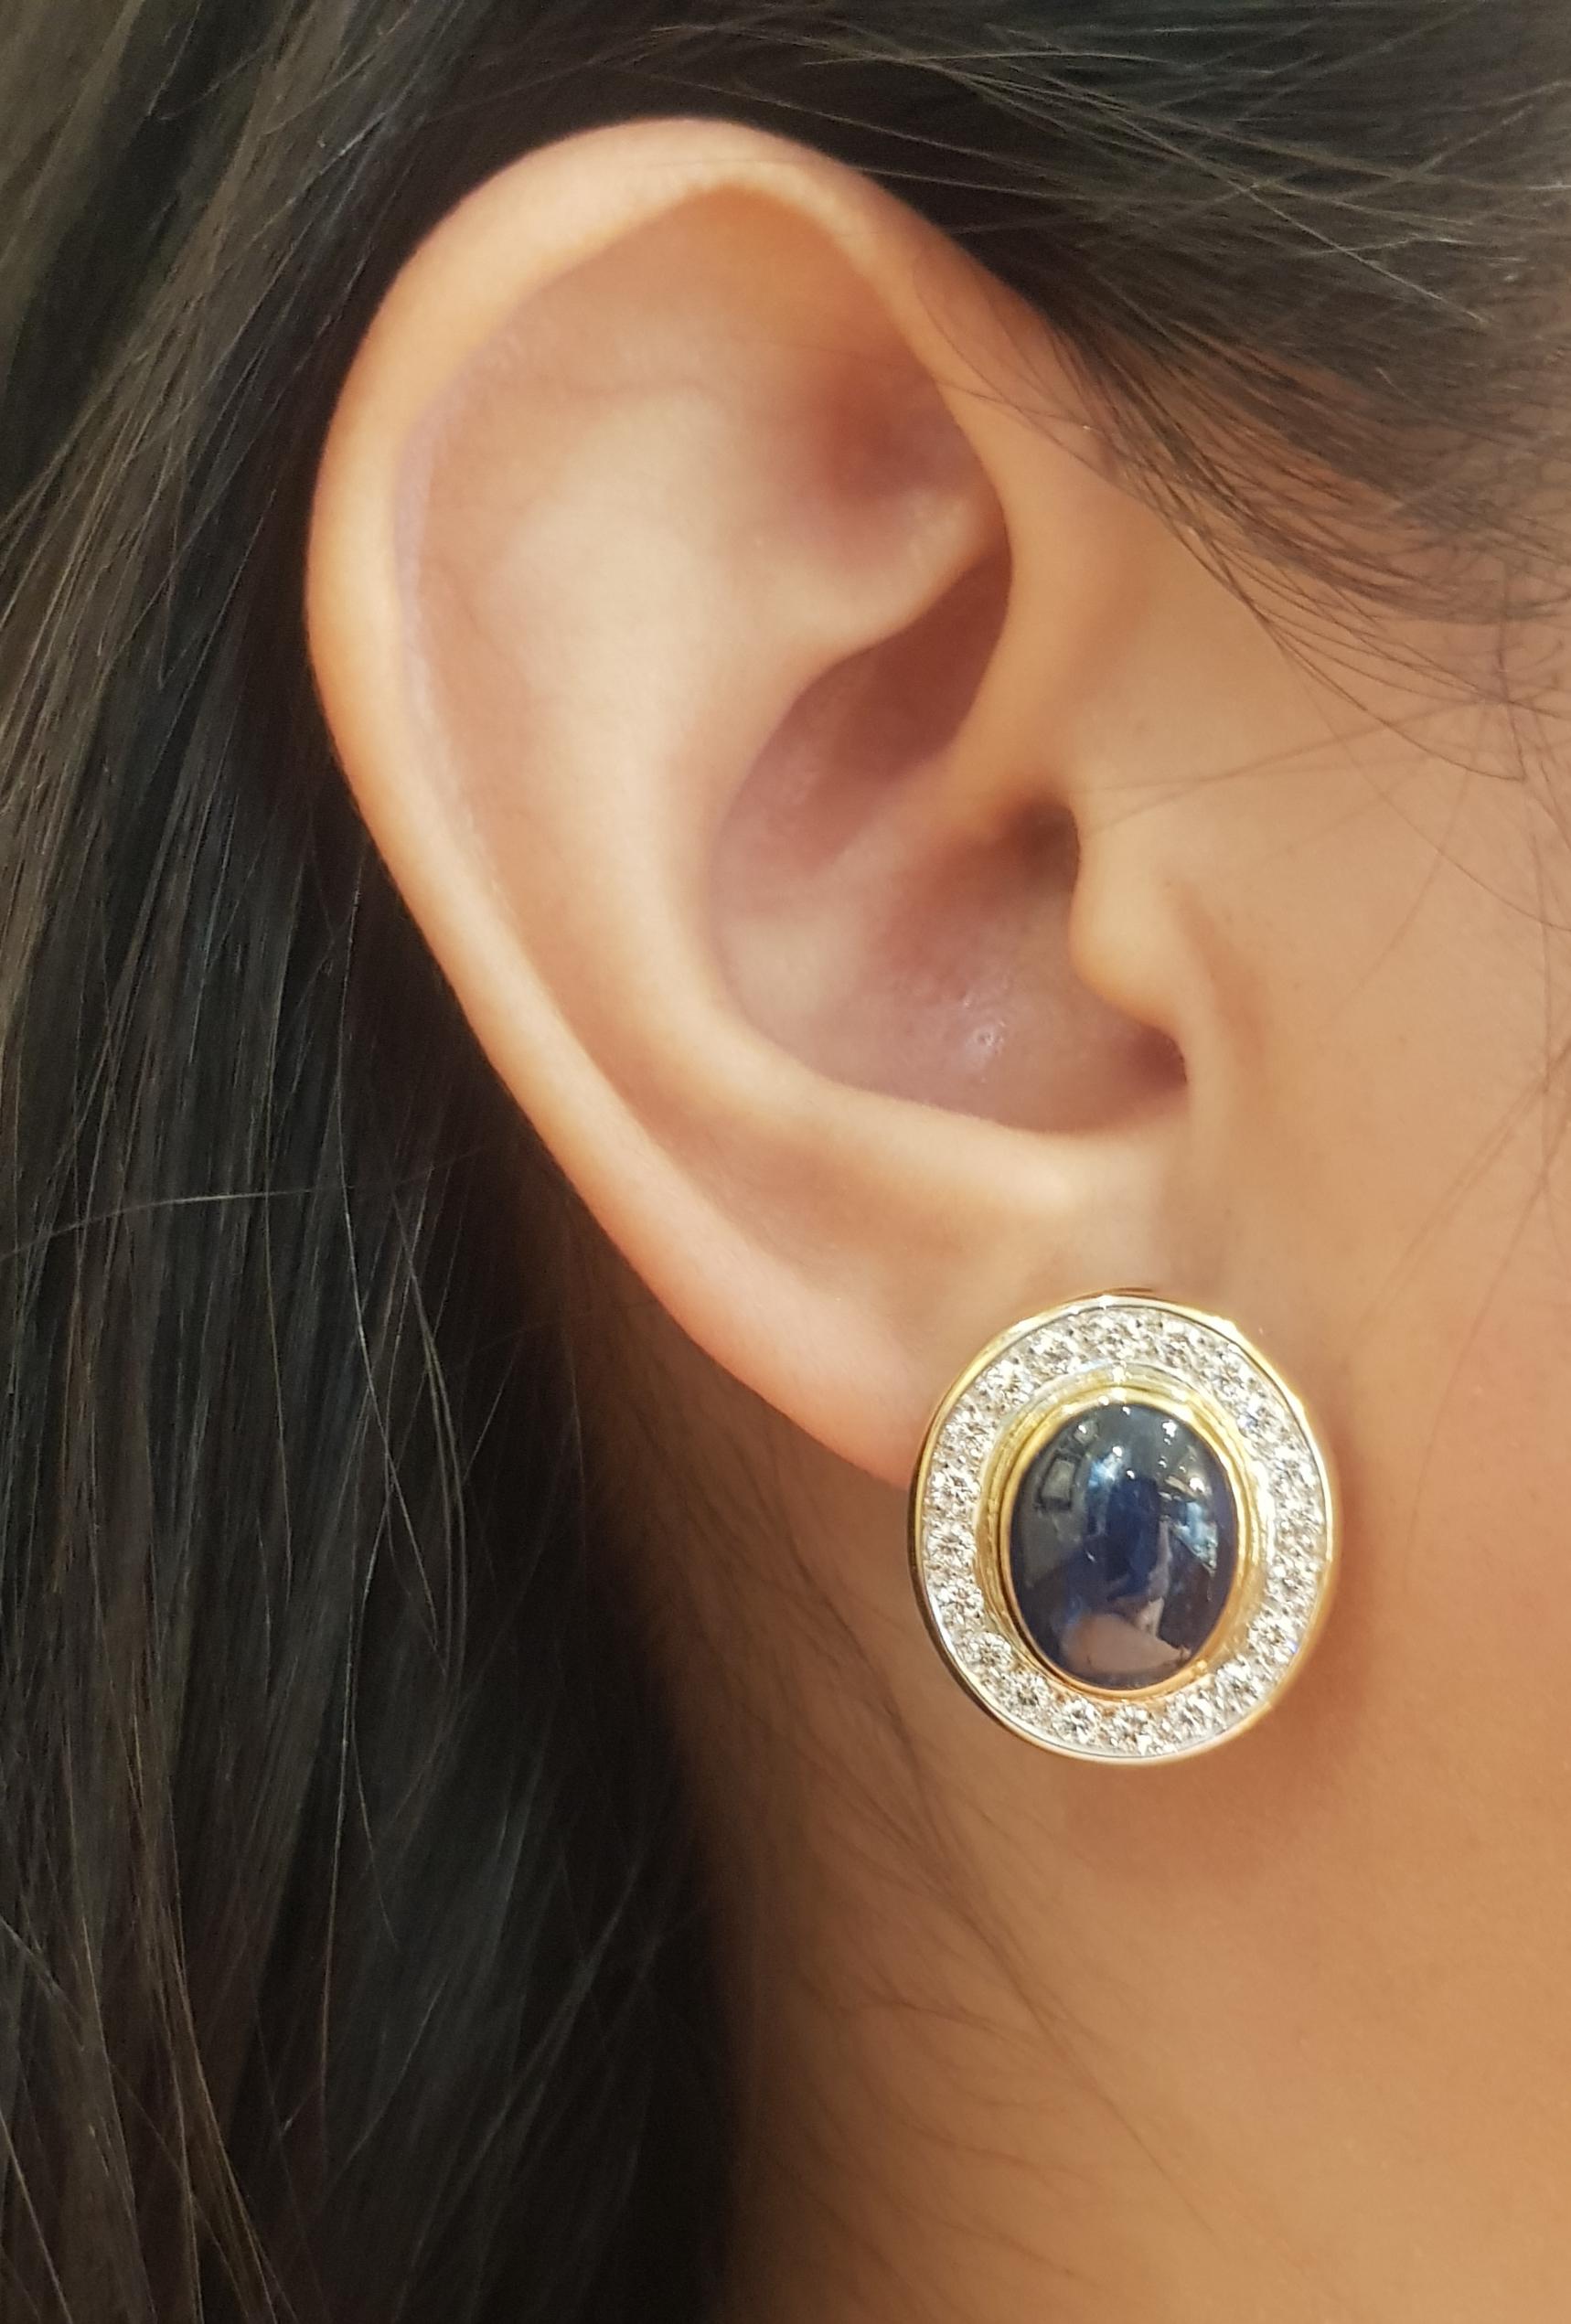 Cabochon Blue Sapphire 12.41 carats with Diamond 1.01 carats Earrings set in 18K Gold Settings

Width: 1.8 cm 
Length: 2.1 cm
Total Weight: 12.69 grams

